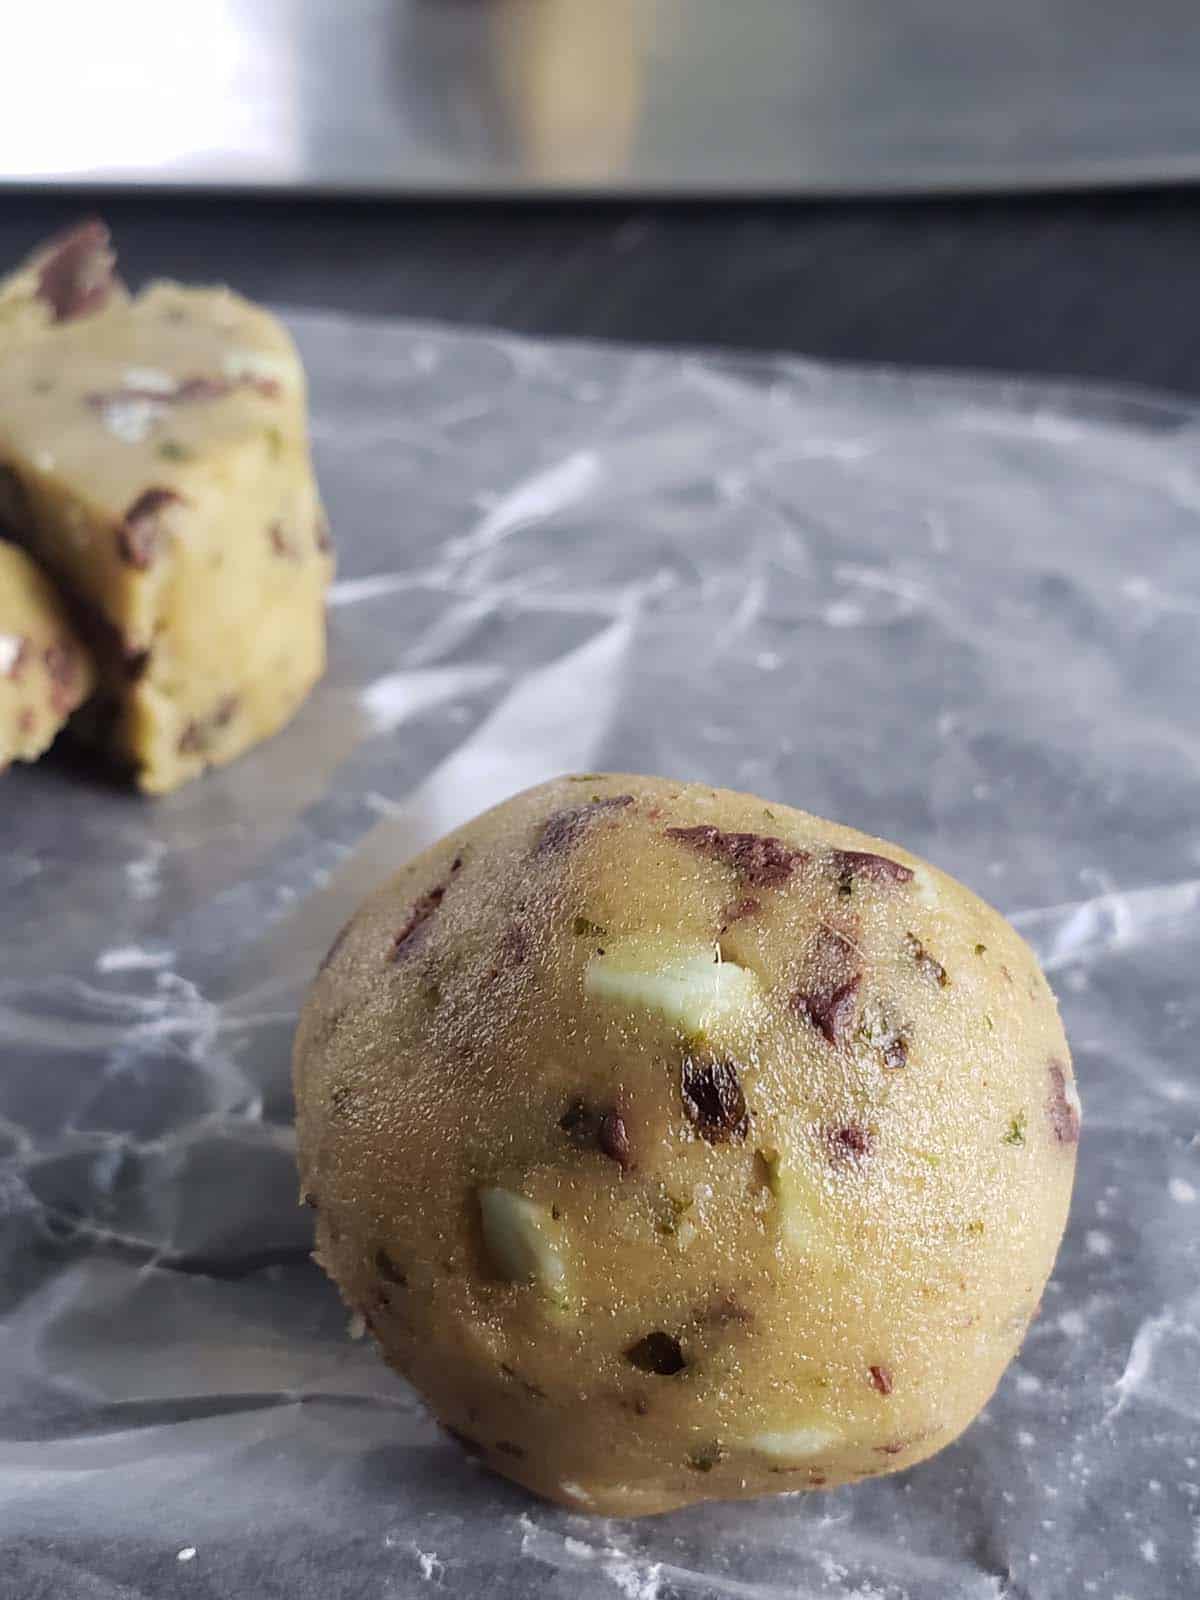 Mint chocolate chip cookie dough rolled into a ball on wax paper.